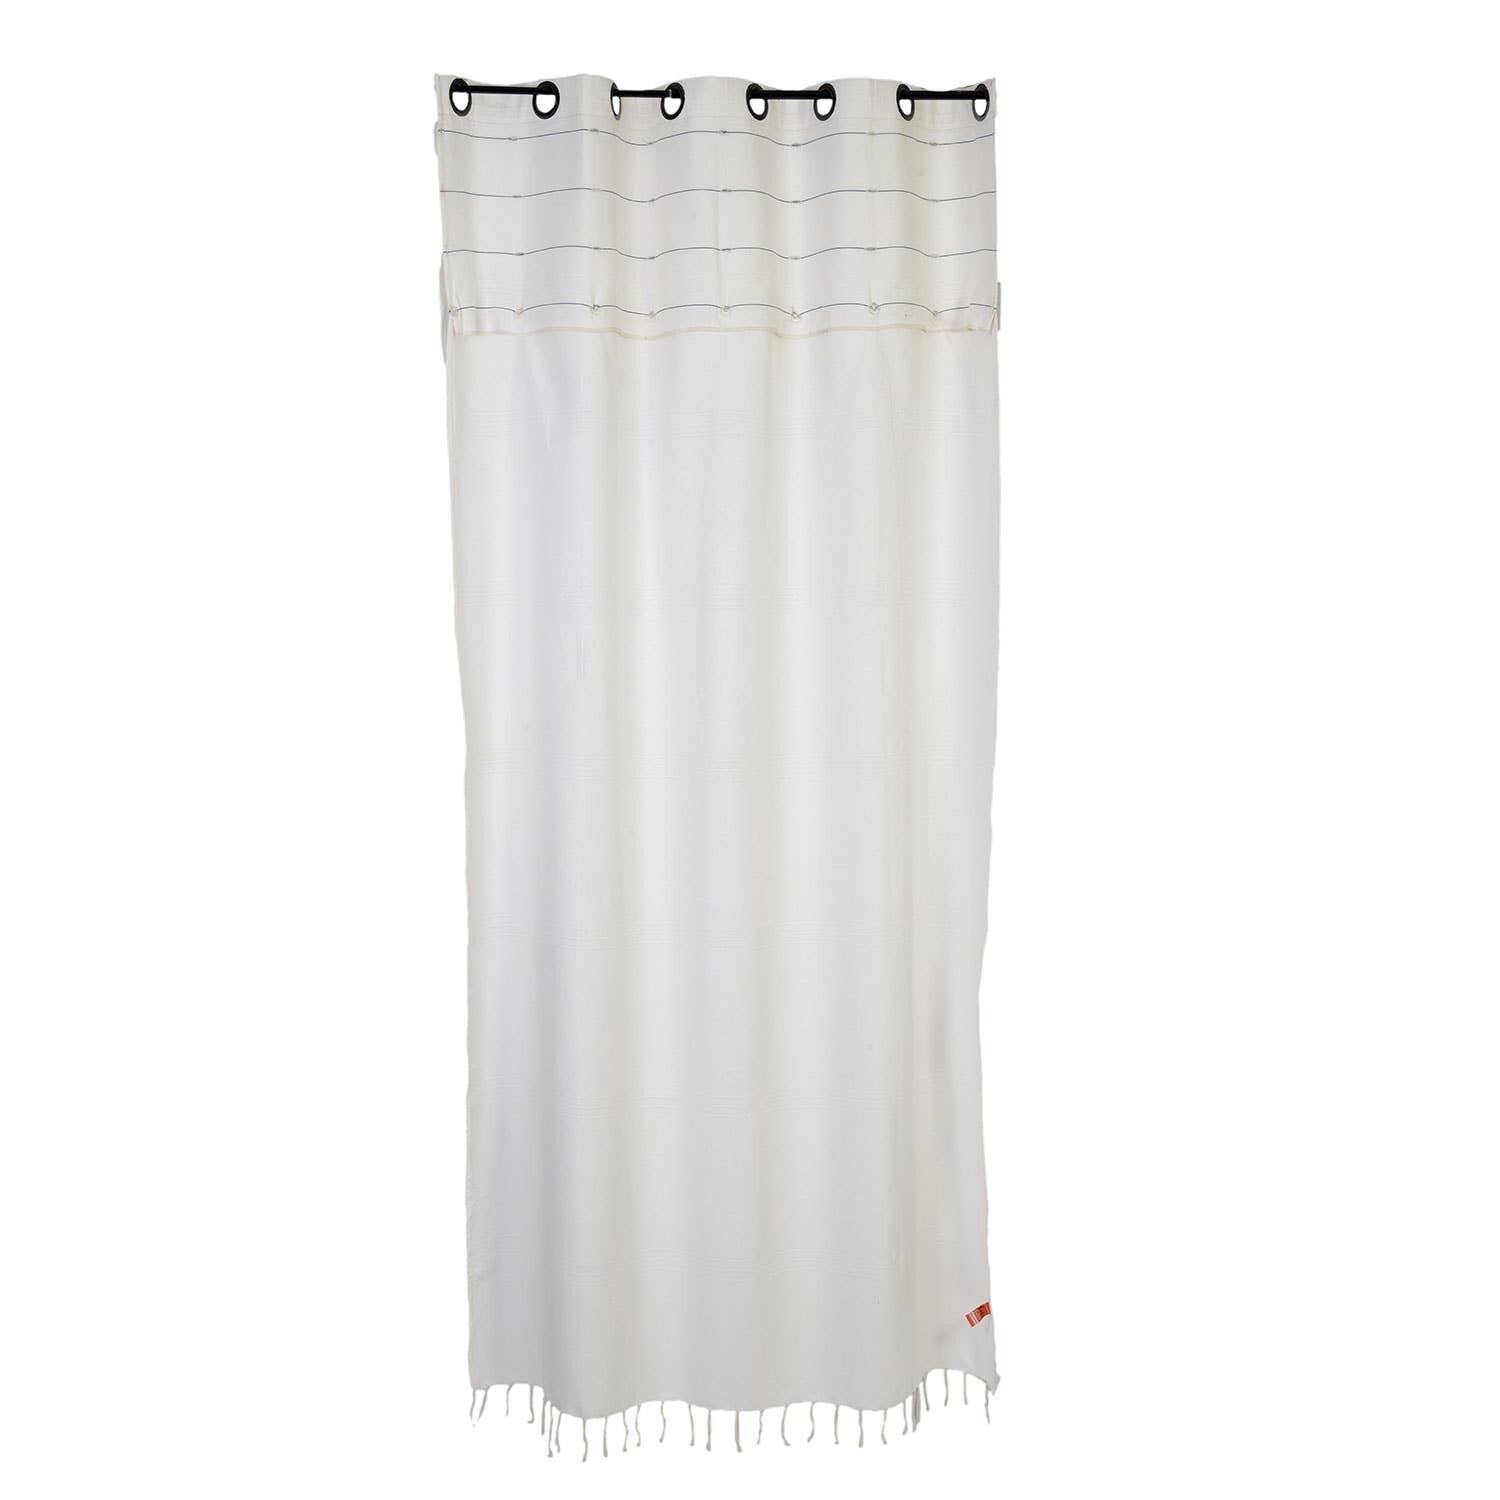 Bulk Buys OF004-48 Shower Curtain with Rings Set, 48 Piece - Walmart.com